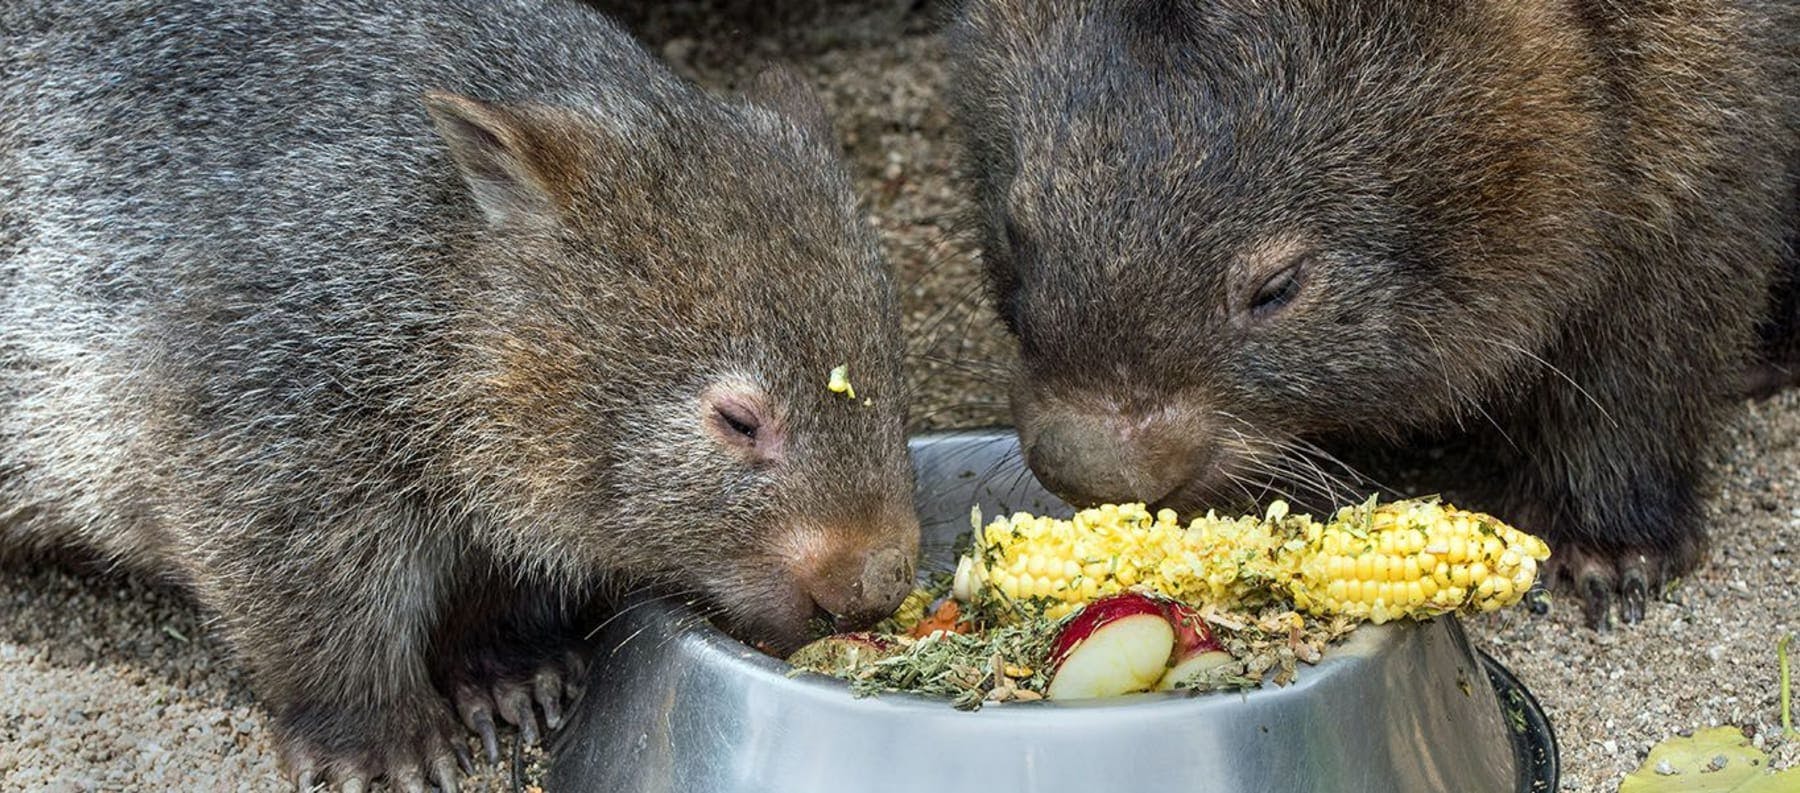 Two Wombats eating a good meal